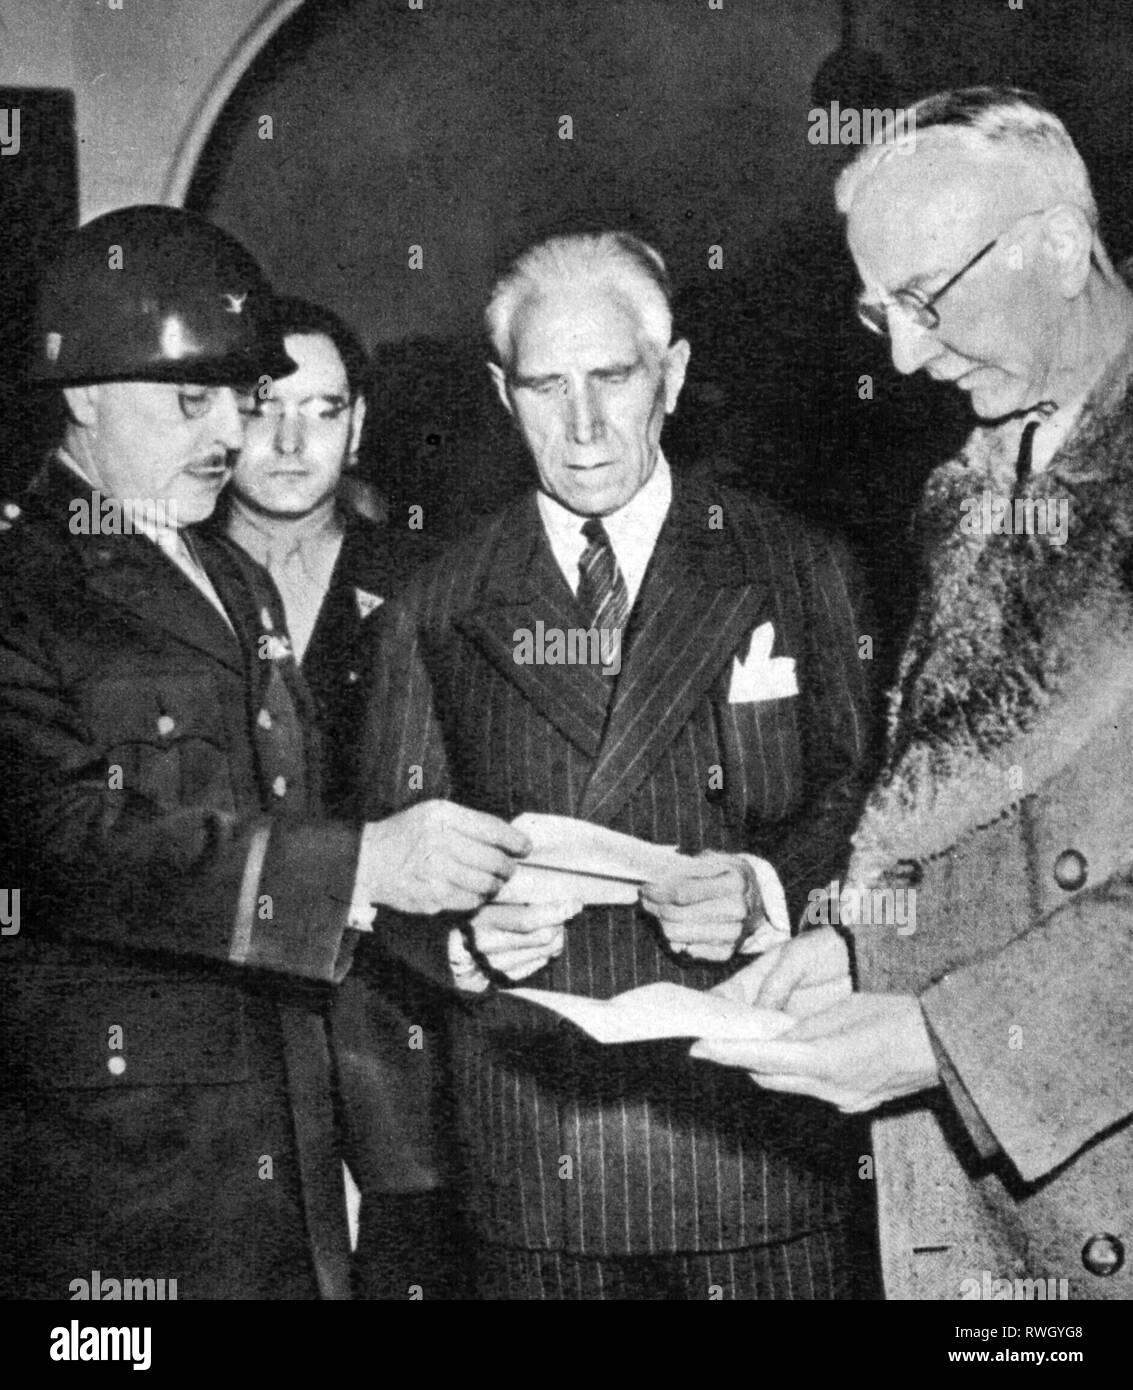 Papen, Franz von, 29.10.1879 - 2.5.1969, German politician (centre), half-length, with Hjalmar Schacht (on the right) and camp commander colonel Burton C. Andrus (on the left), Central Continental Prisoner of War Enclosure No 32, Mondorf-les-Bains, Luxembourg, 1945, Additional-Rights-Clearance-Info-Not-Available Stock Photo